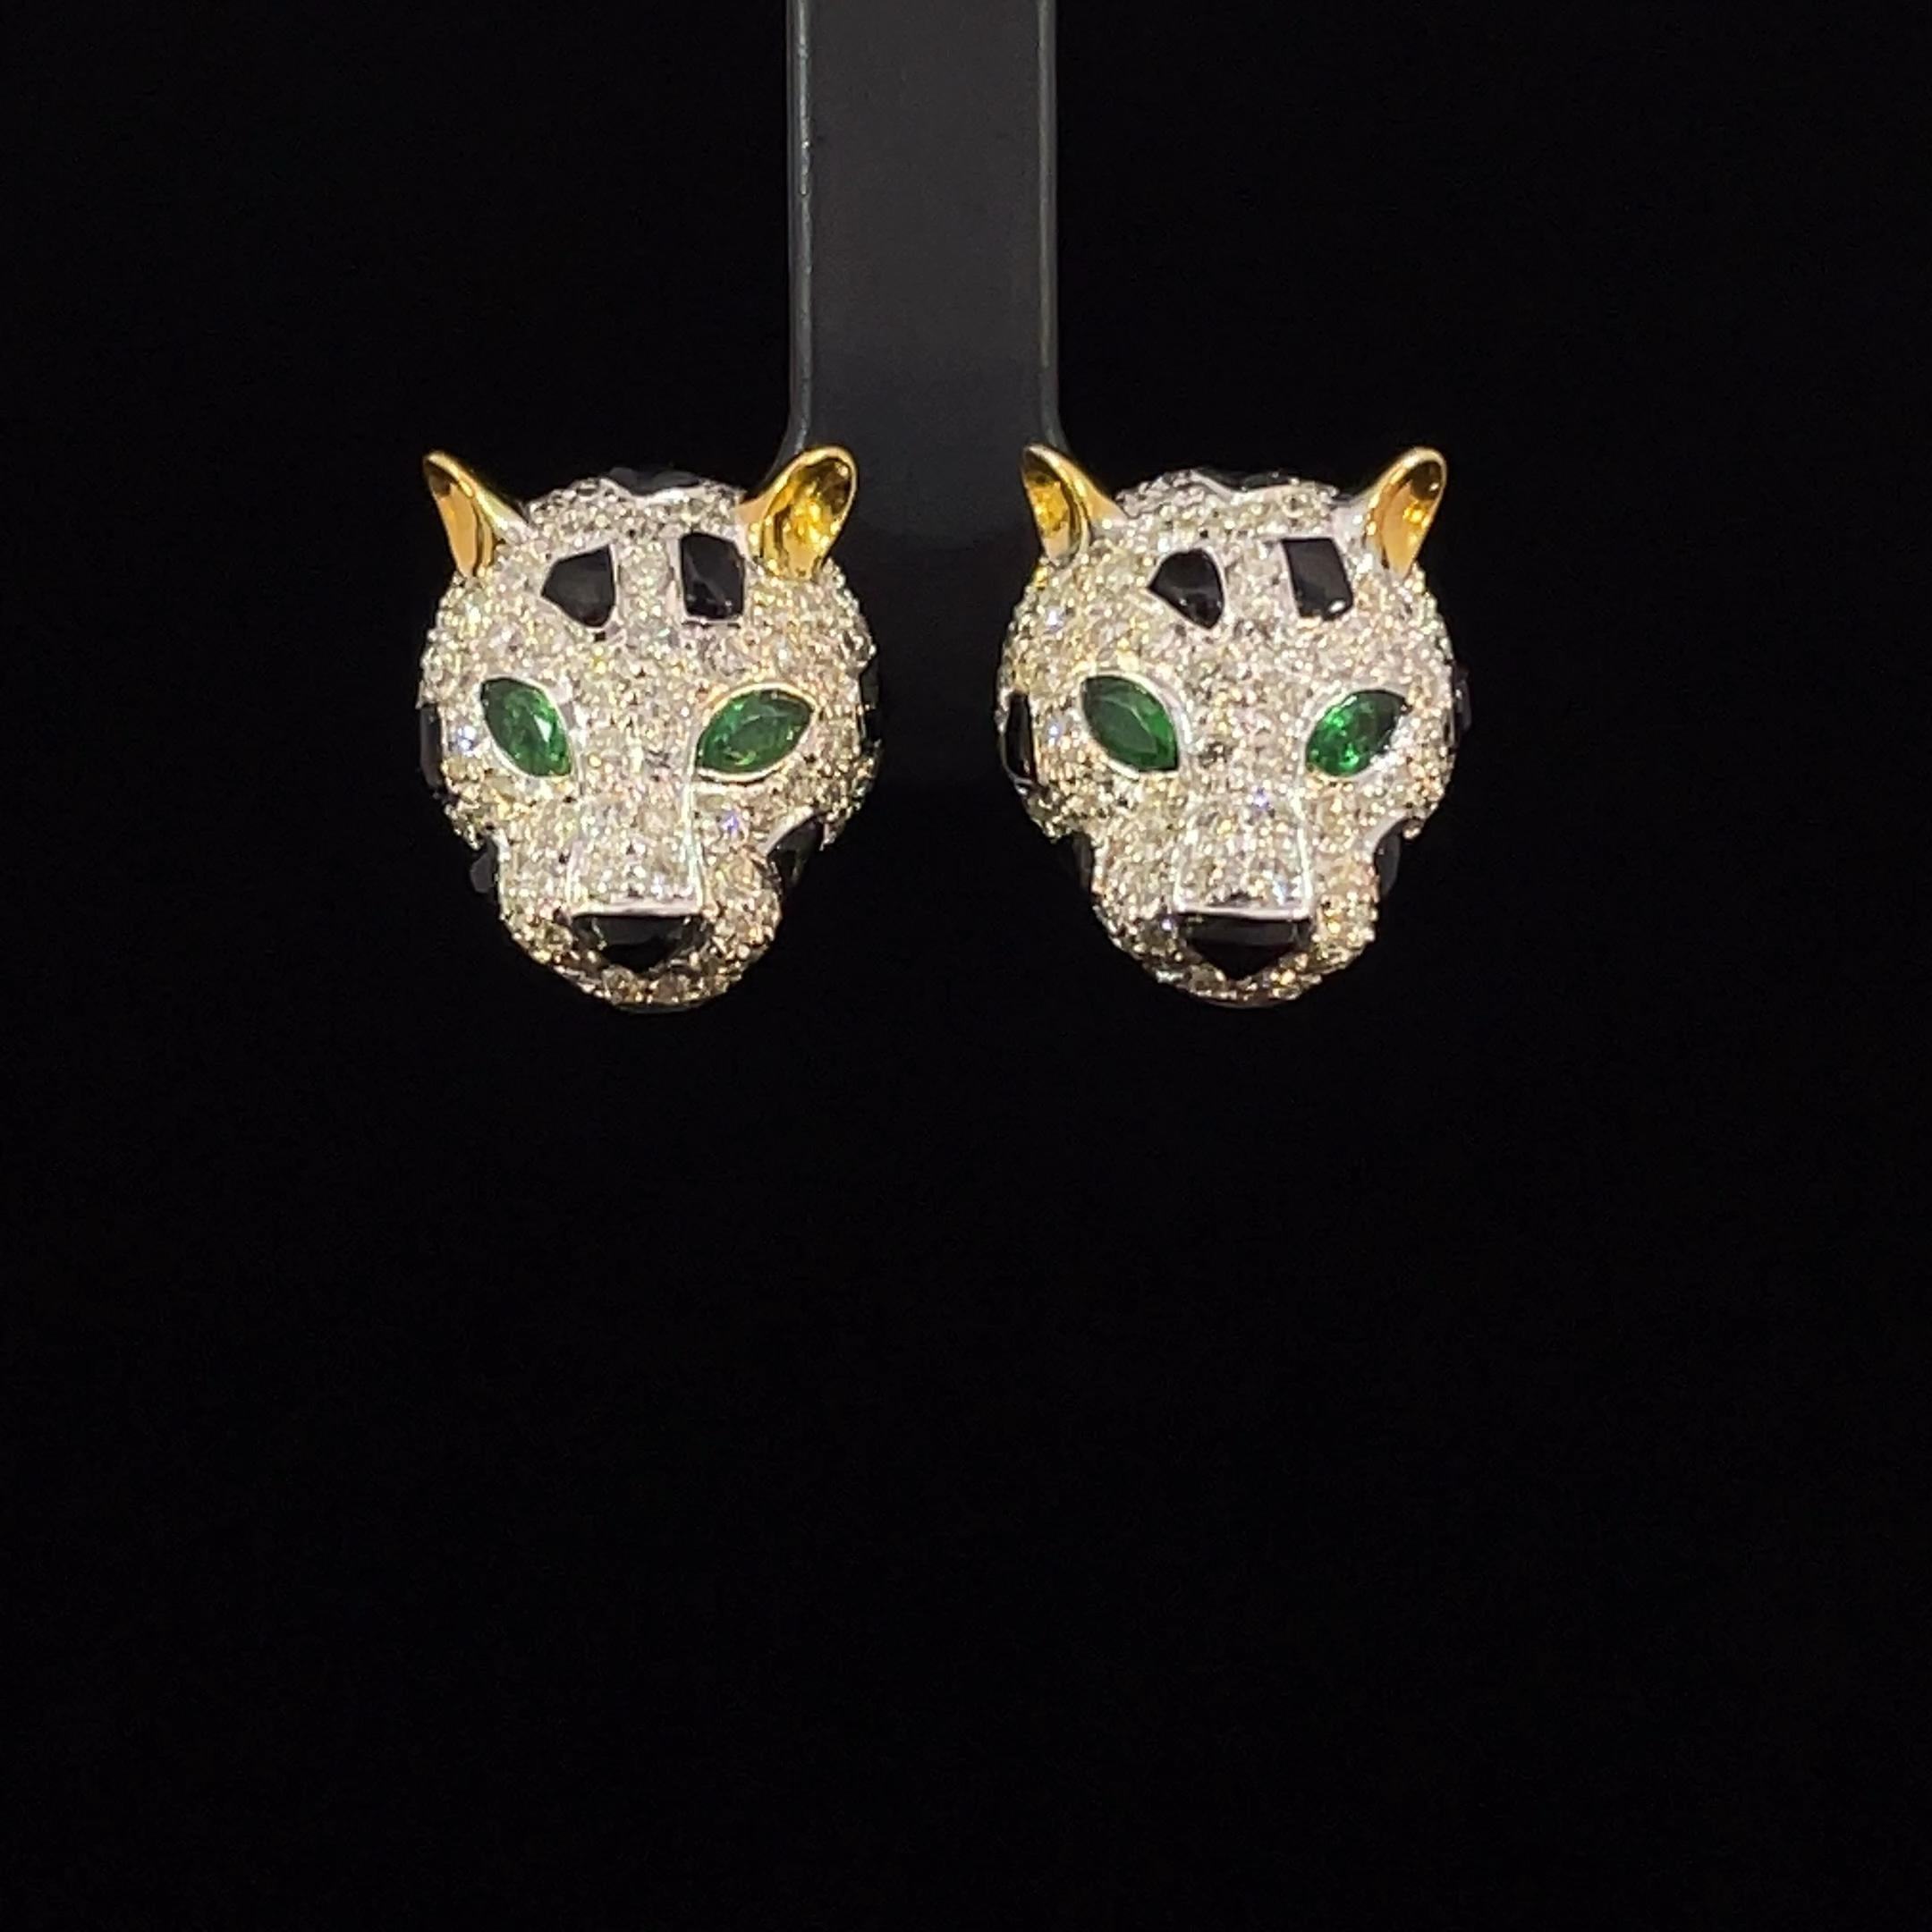 Modern 3.01 Carat Diamond and Emerald Panther Studs For Sale